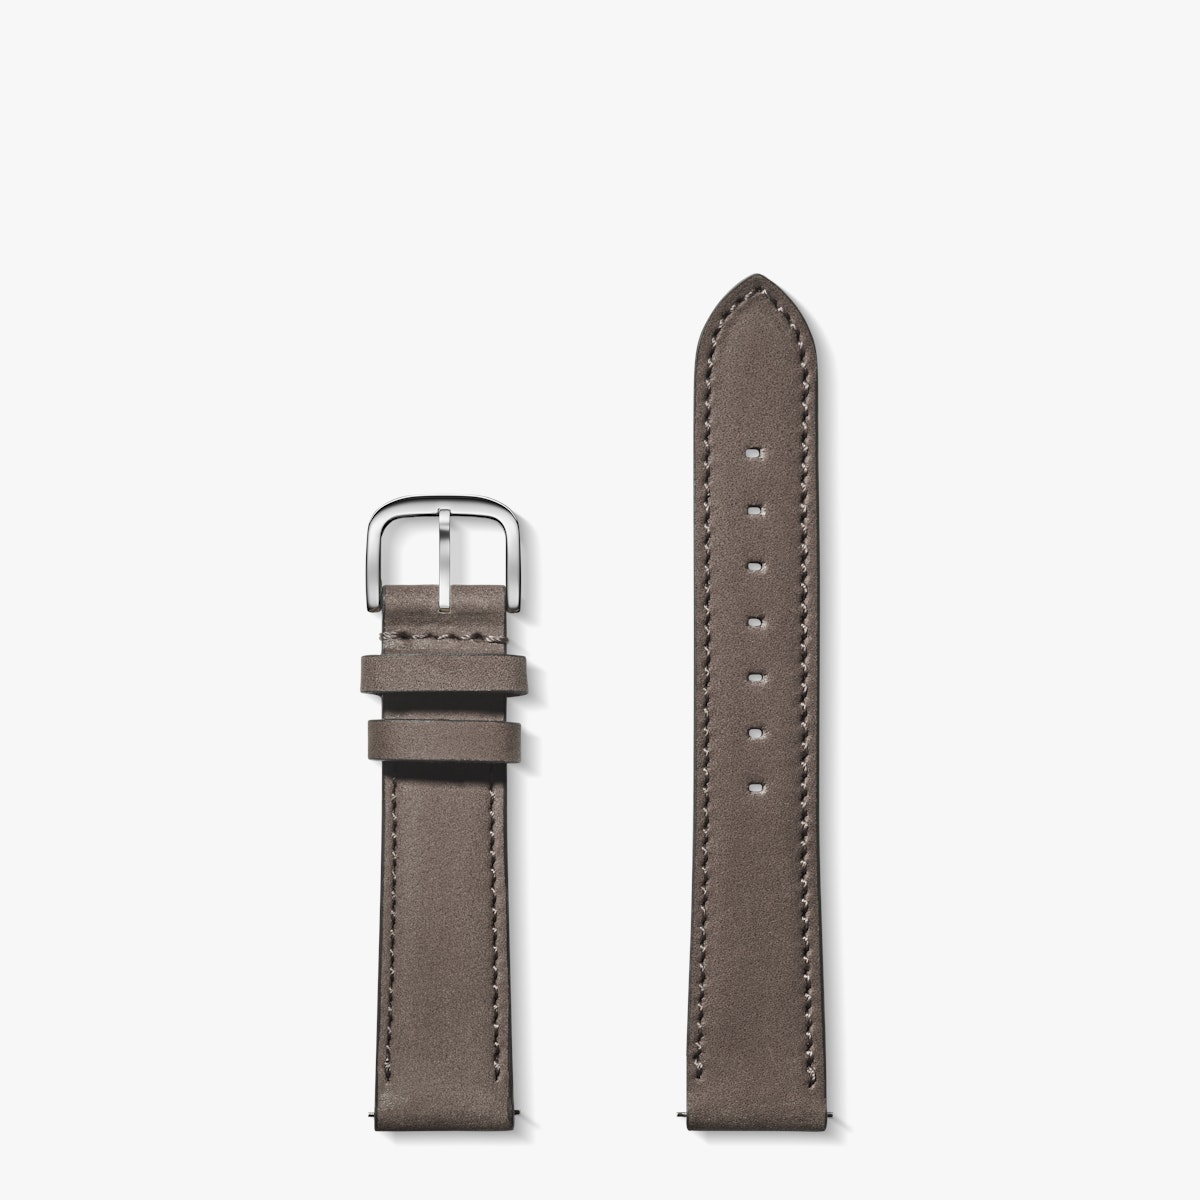 Shinola Men's Outrigger Leather Watchband